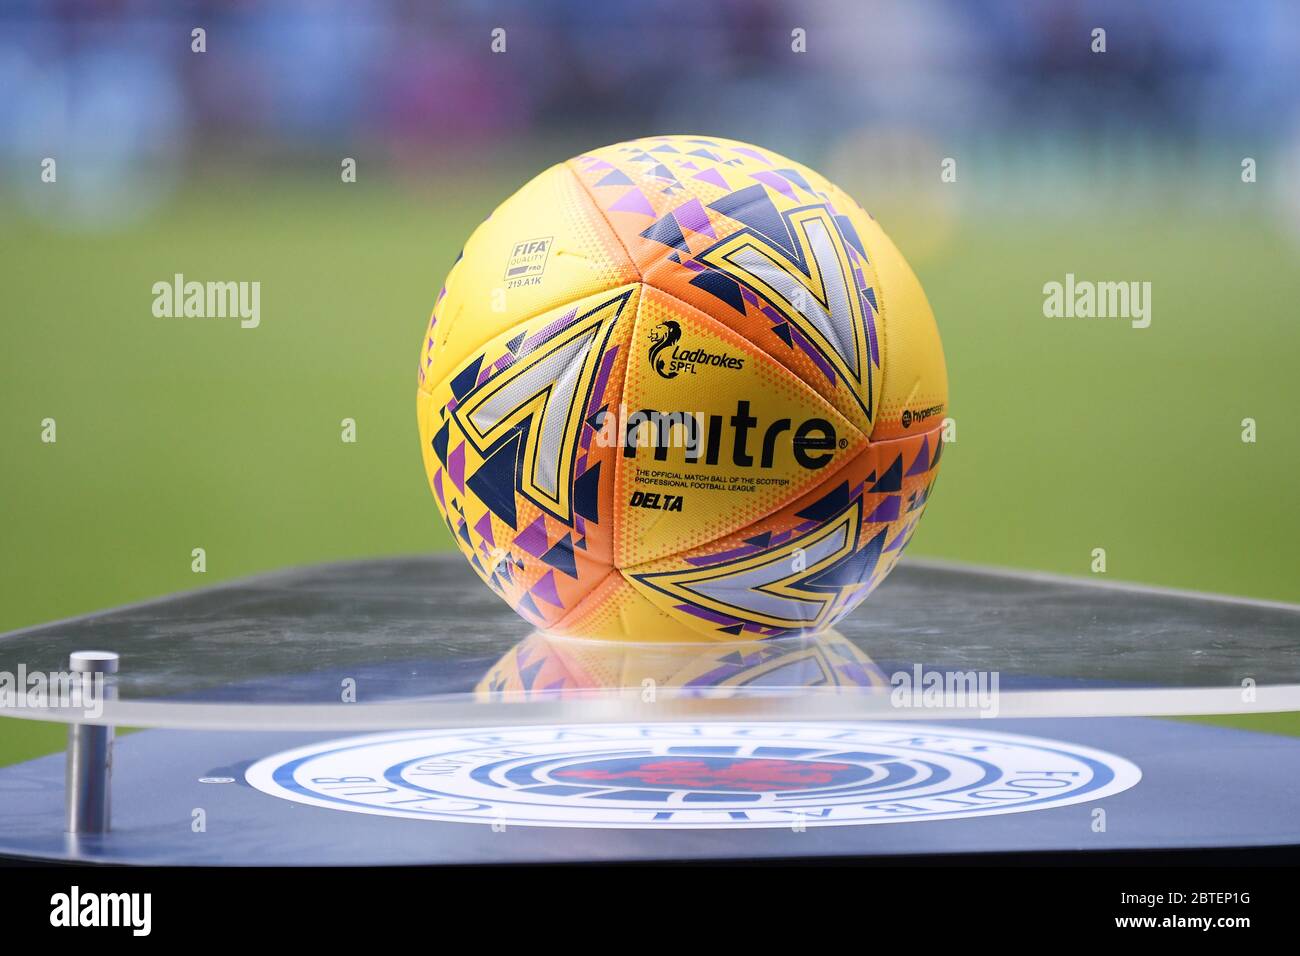 GLASGOW, SCOTLAND - JULY 18, 2019: The official Scottish Premiership match ball pictured prior to the 2nd leg of the 2019/20 UEFA Europa League First Qualifying Round game between Rangers FC (Scotland) and St Joseph's FC (Gibraltar) at Ibrox Park. Stock Photo